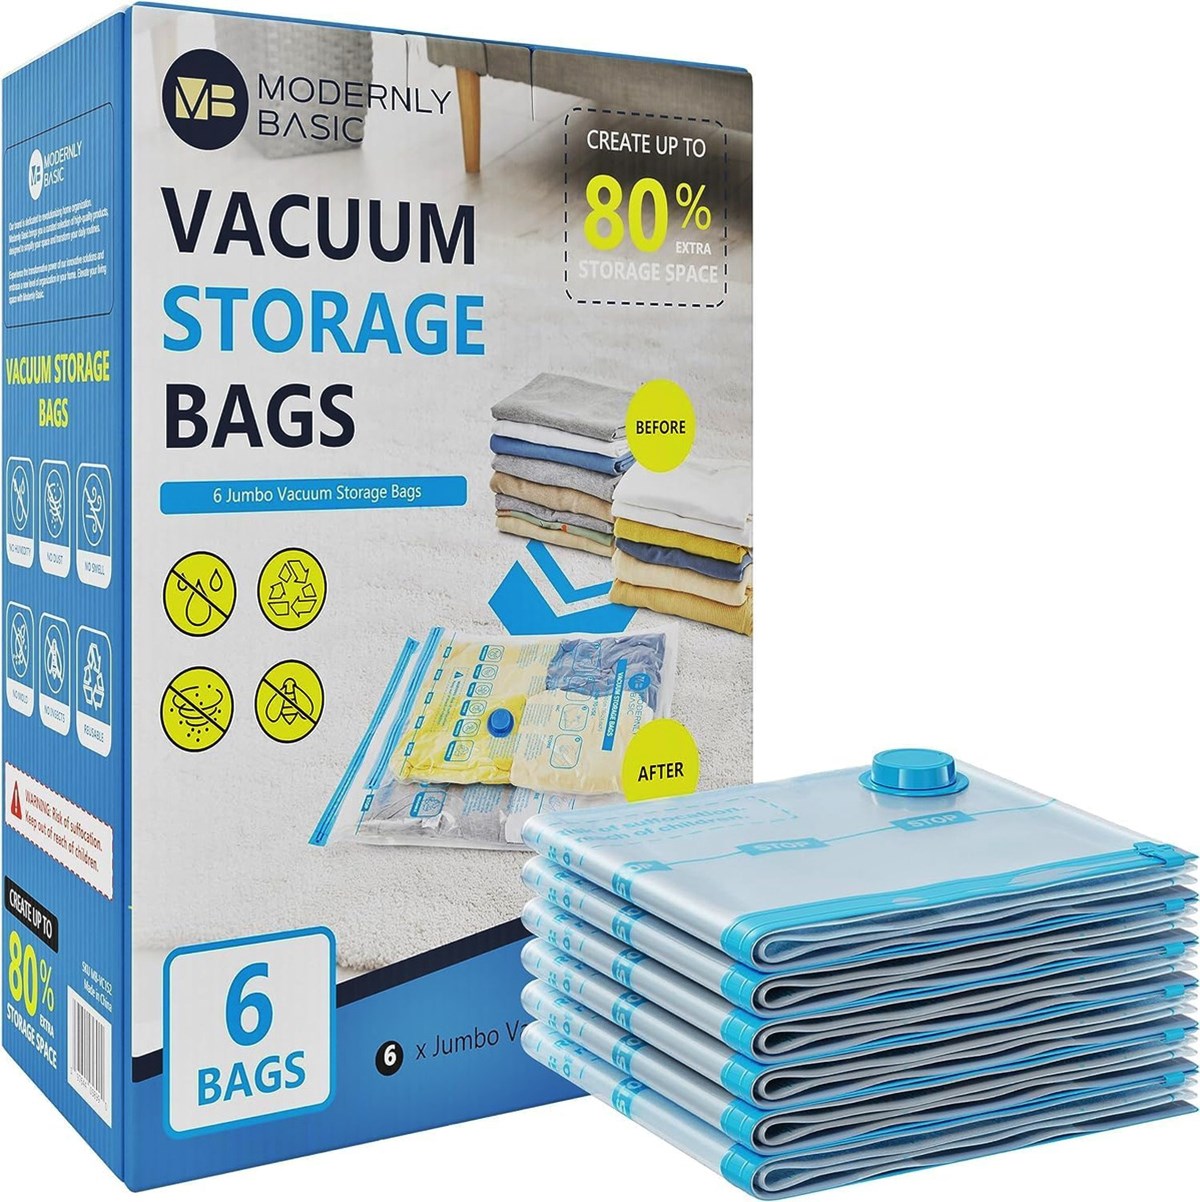 Spacesaver Premium *Jumbo* Vacuum Storage Bags (Works with Any Vacuum  Cleaner + Free Hand-Pump for Travel!) Double-Zip Seal and Triple Seal  Turbo-Valve for 80% More Compression! 